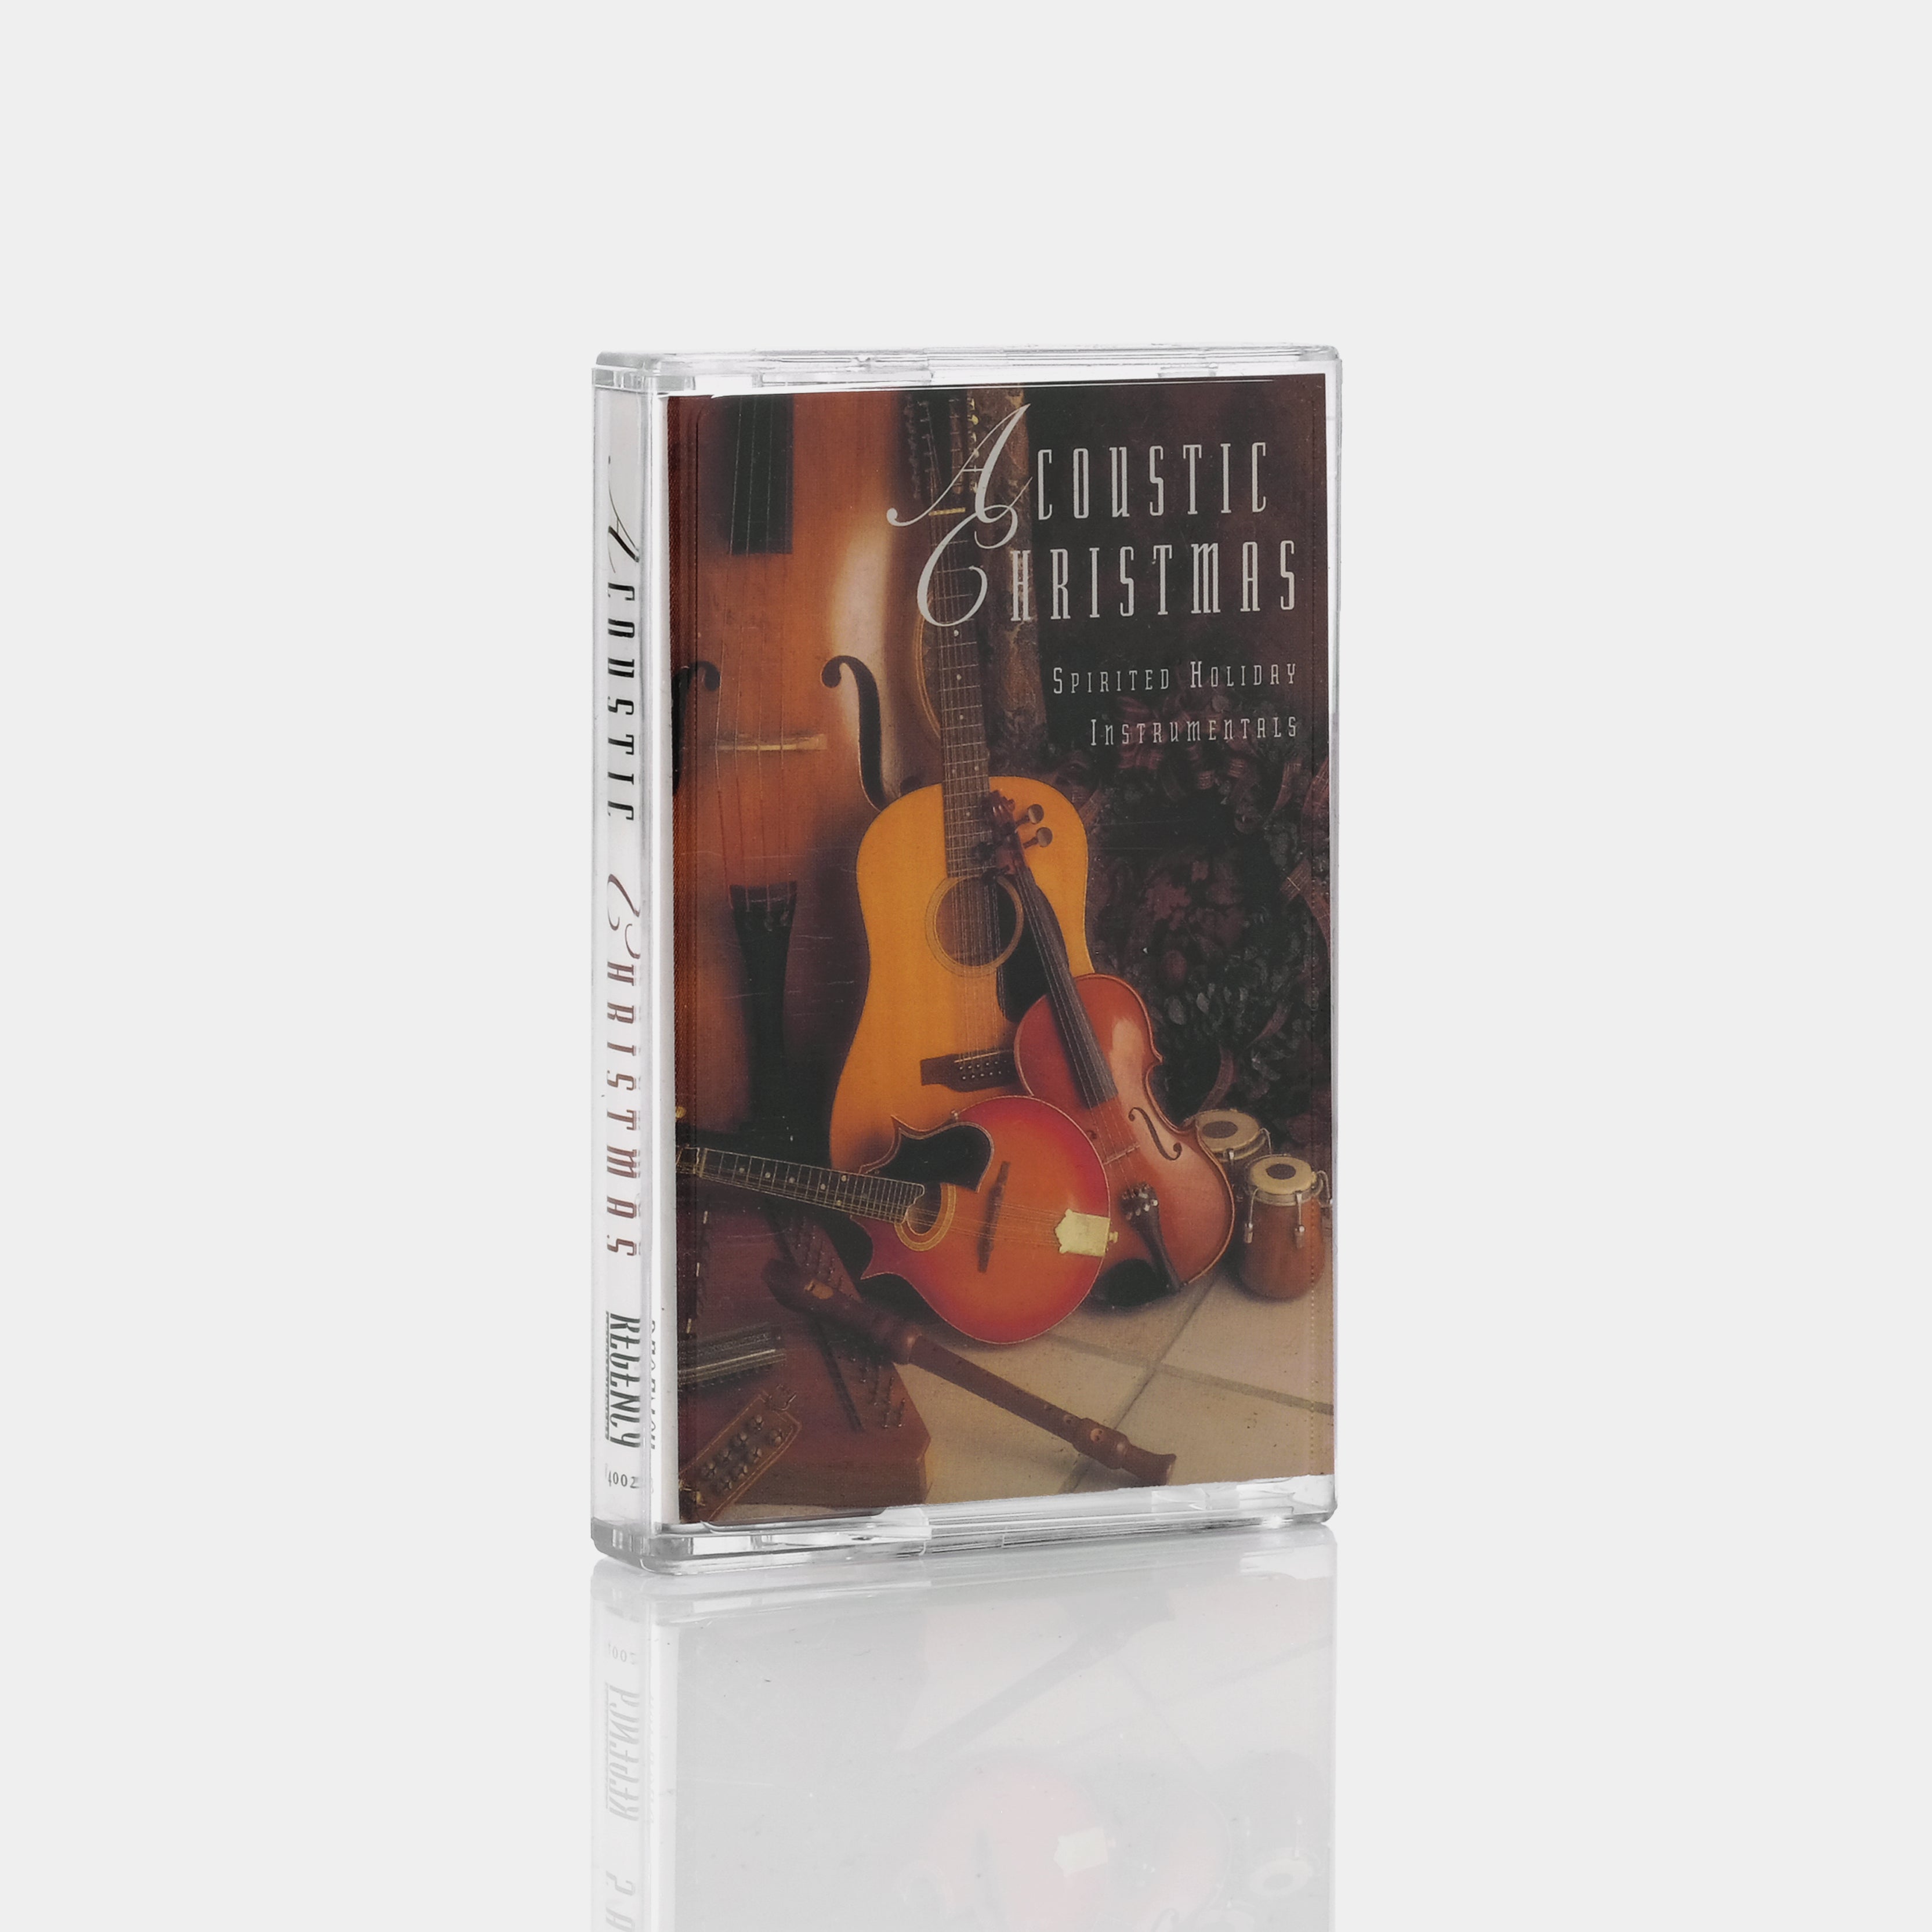 Acoustic Christmas: Spirited Holiday Instrumentals Cassette Tape